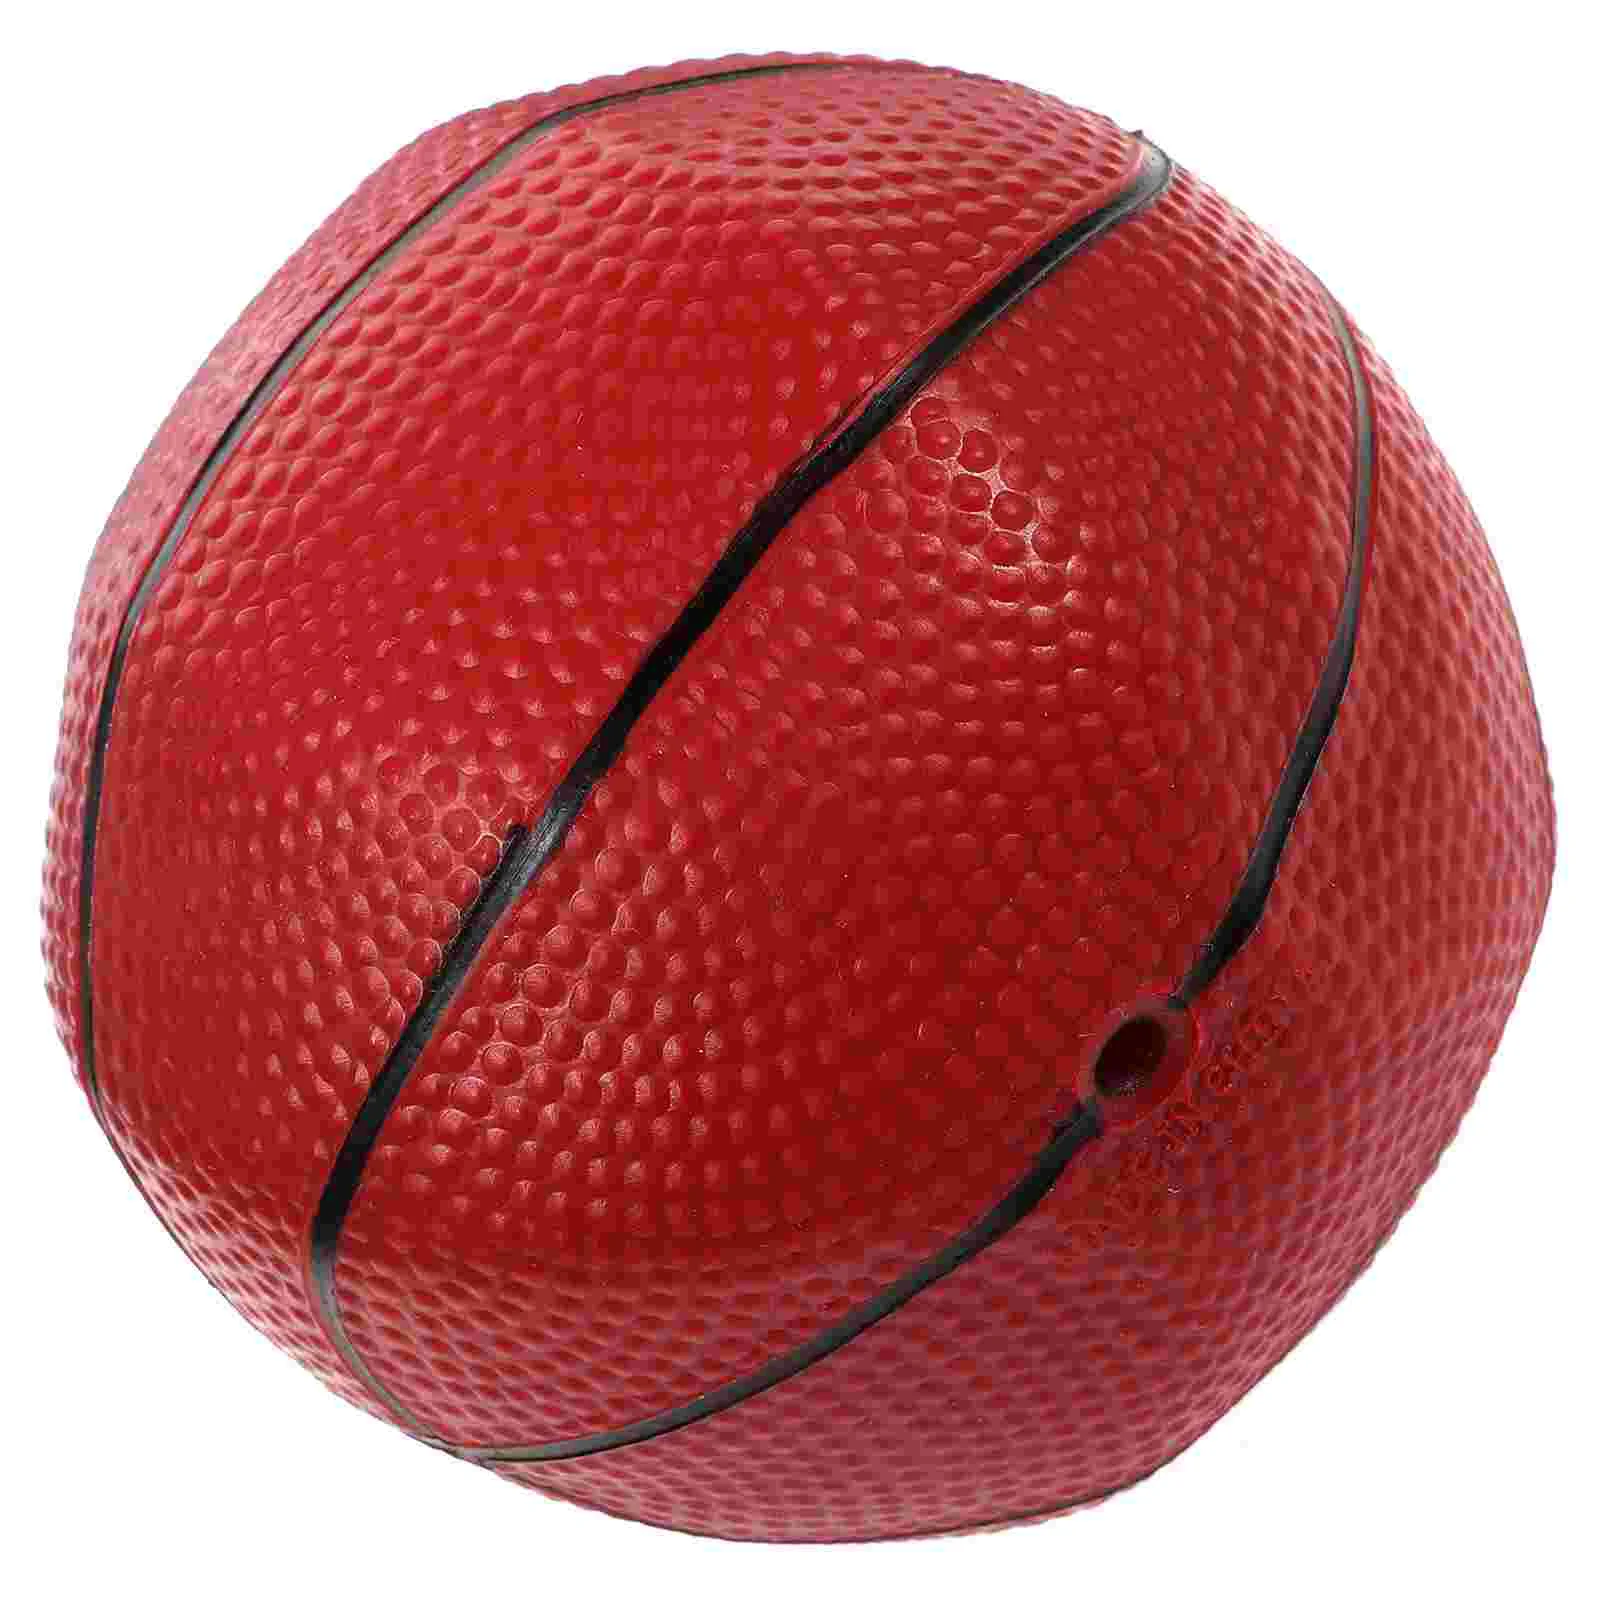 13cm Mini Inflatable Bouncy Basketball Indoor Outdoor Sports Ball Jumping Stress - £10.29 GBP